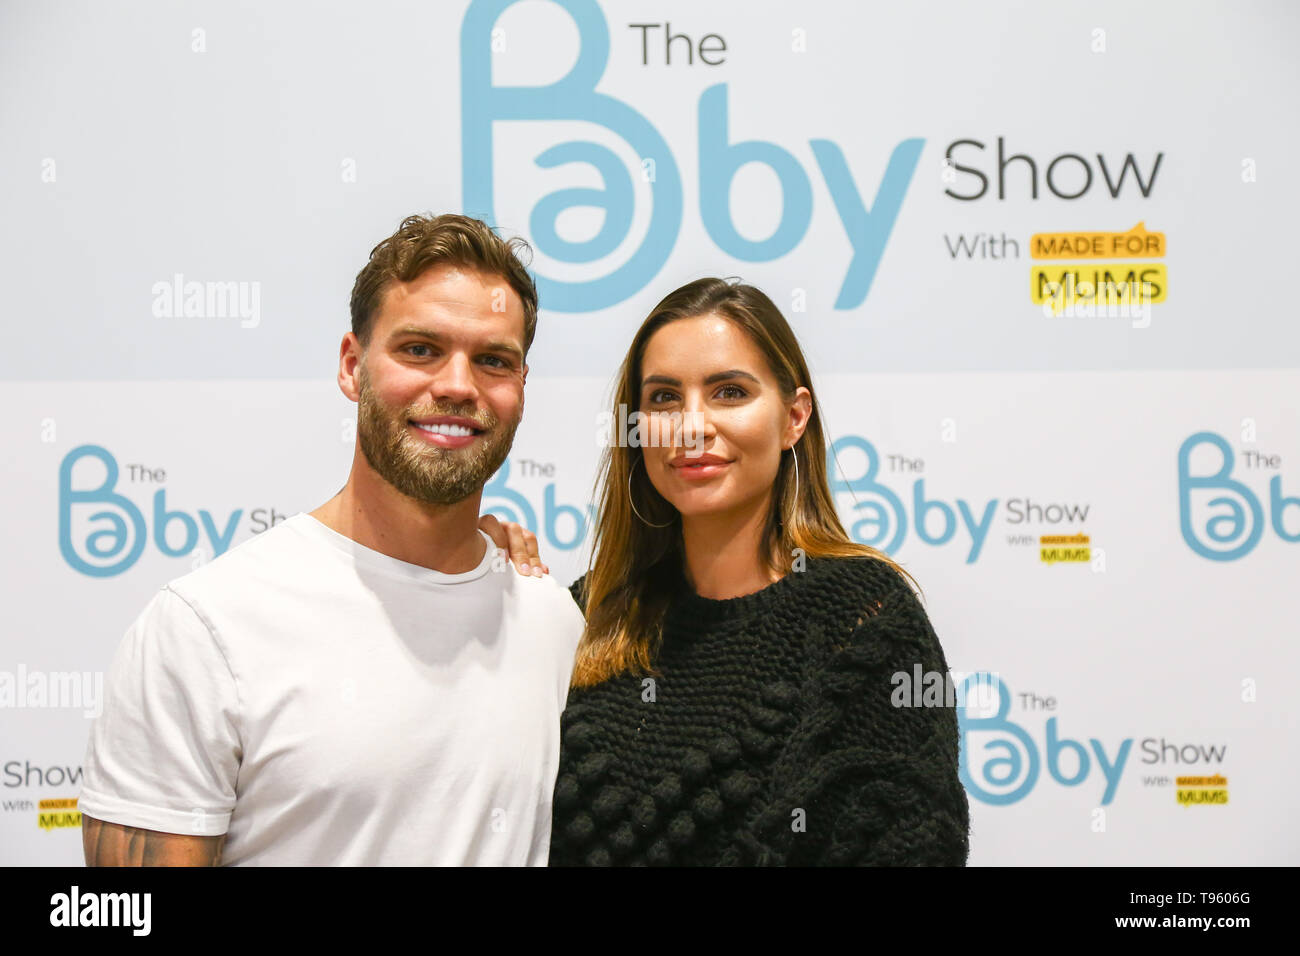 Birmingham, UK. 17th May, 2019. TV's reality show stars Jess Shears and Dom Lever appear at The Baby Show at Birmingham's NEC. The Love Island couple who got married on live TV are expecting their first child but the due date is a secret. Peter Lopeman/Alamy Live News Stock Photo